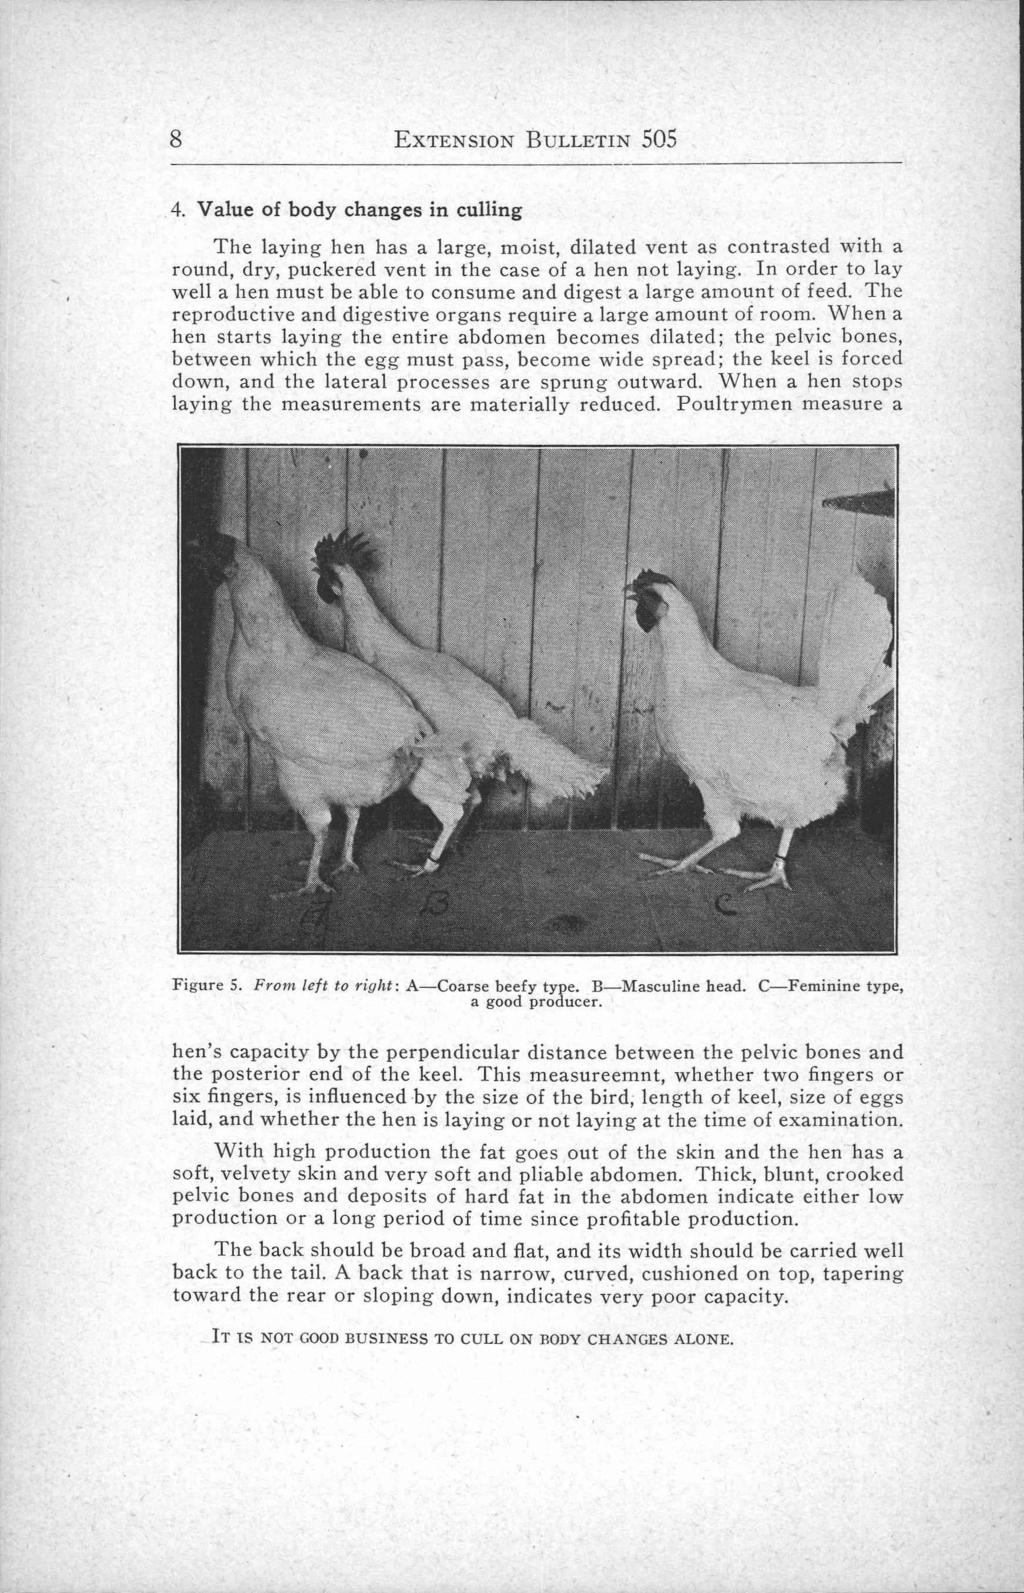 8 EXTENSION BULLETIN 505 4. Value of body changes in culling The laying hen has a large, moist, dilated vent as contrasted with a round, dry, puckered vent in the case of a hen not laying.